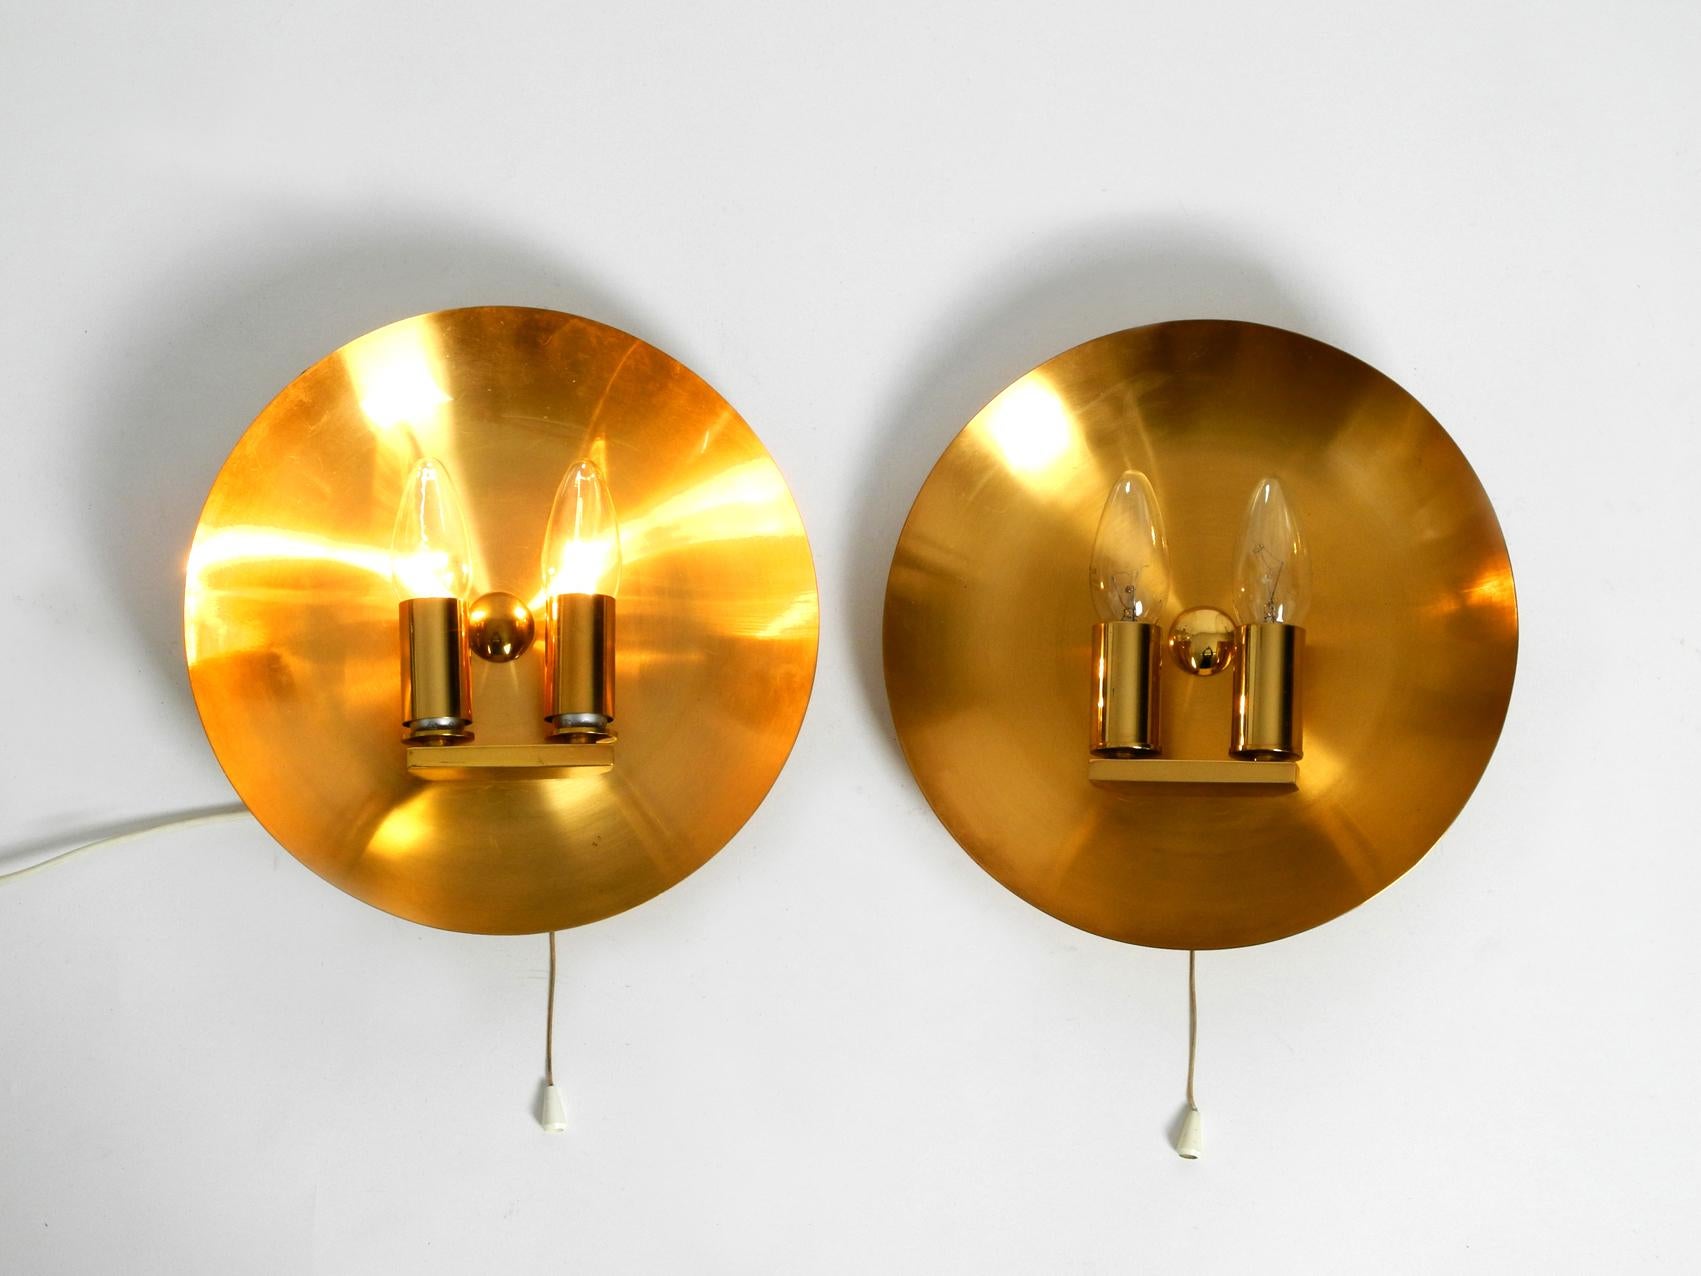 Metal Pair of Very Rare and High Quality 1970s Round Brass Wall Lamps, Sconces by WKR